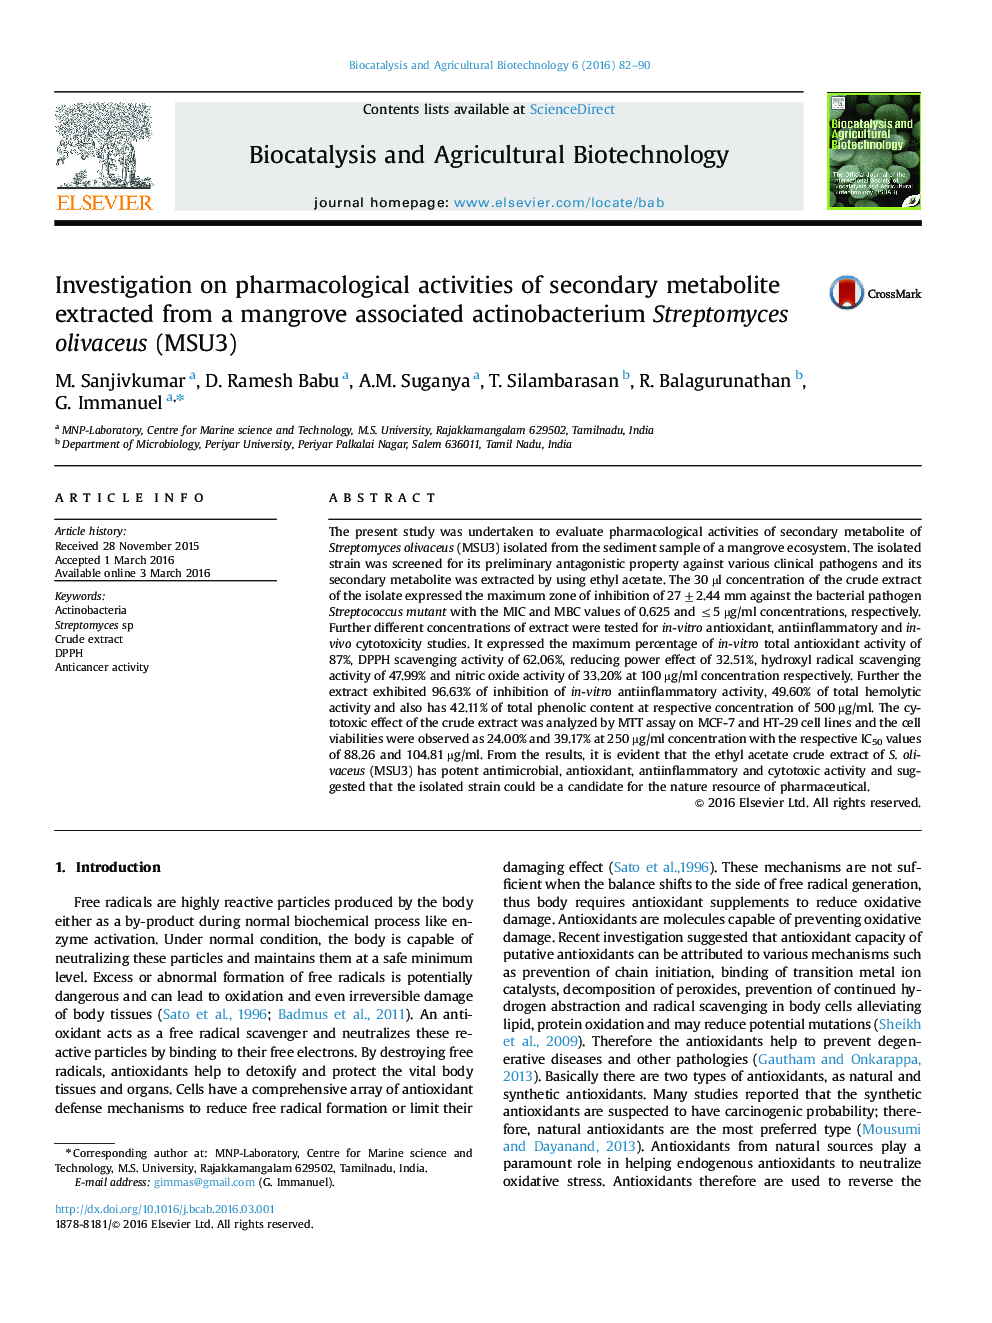 Investigation on pharmacological activities of secondary metabolite extracted from a mangrove associated actinobacterium Streptomyces olivaceus (MSU3)